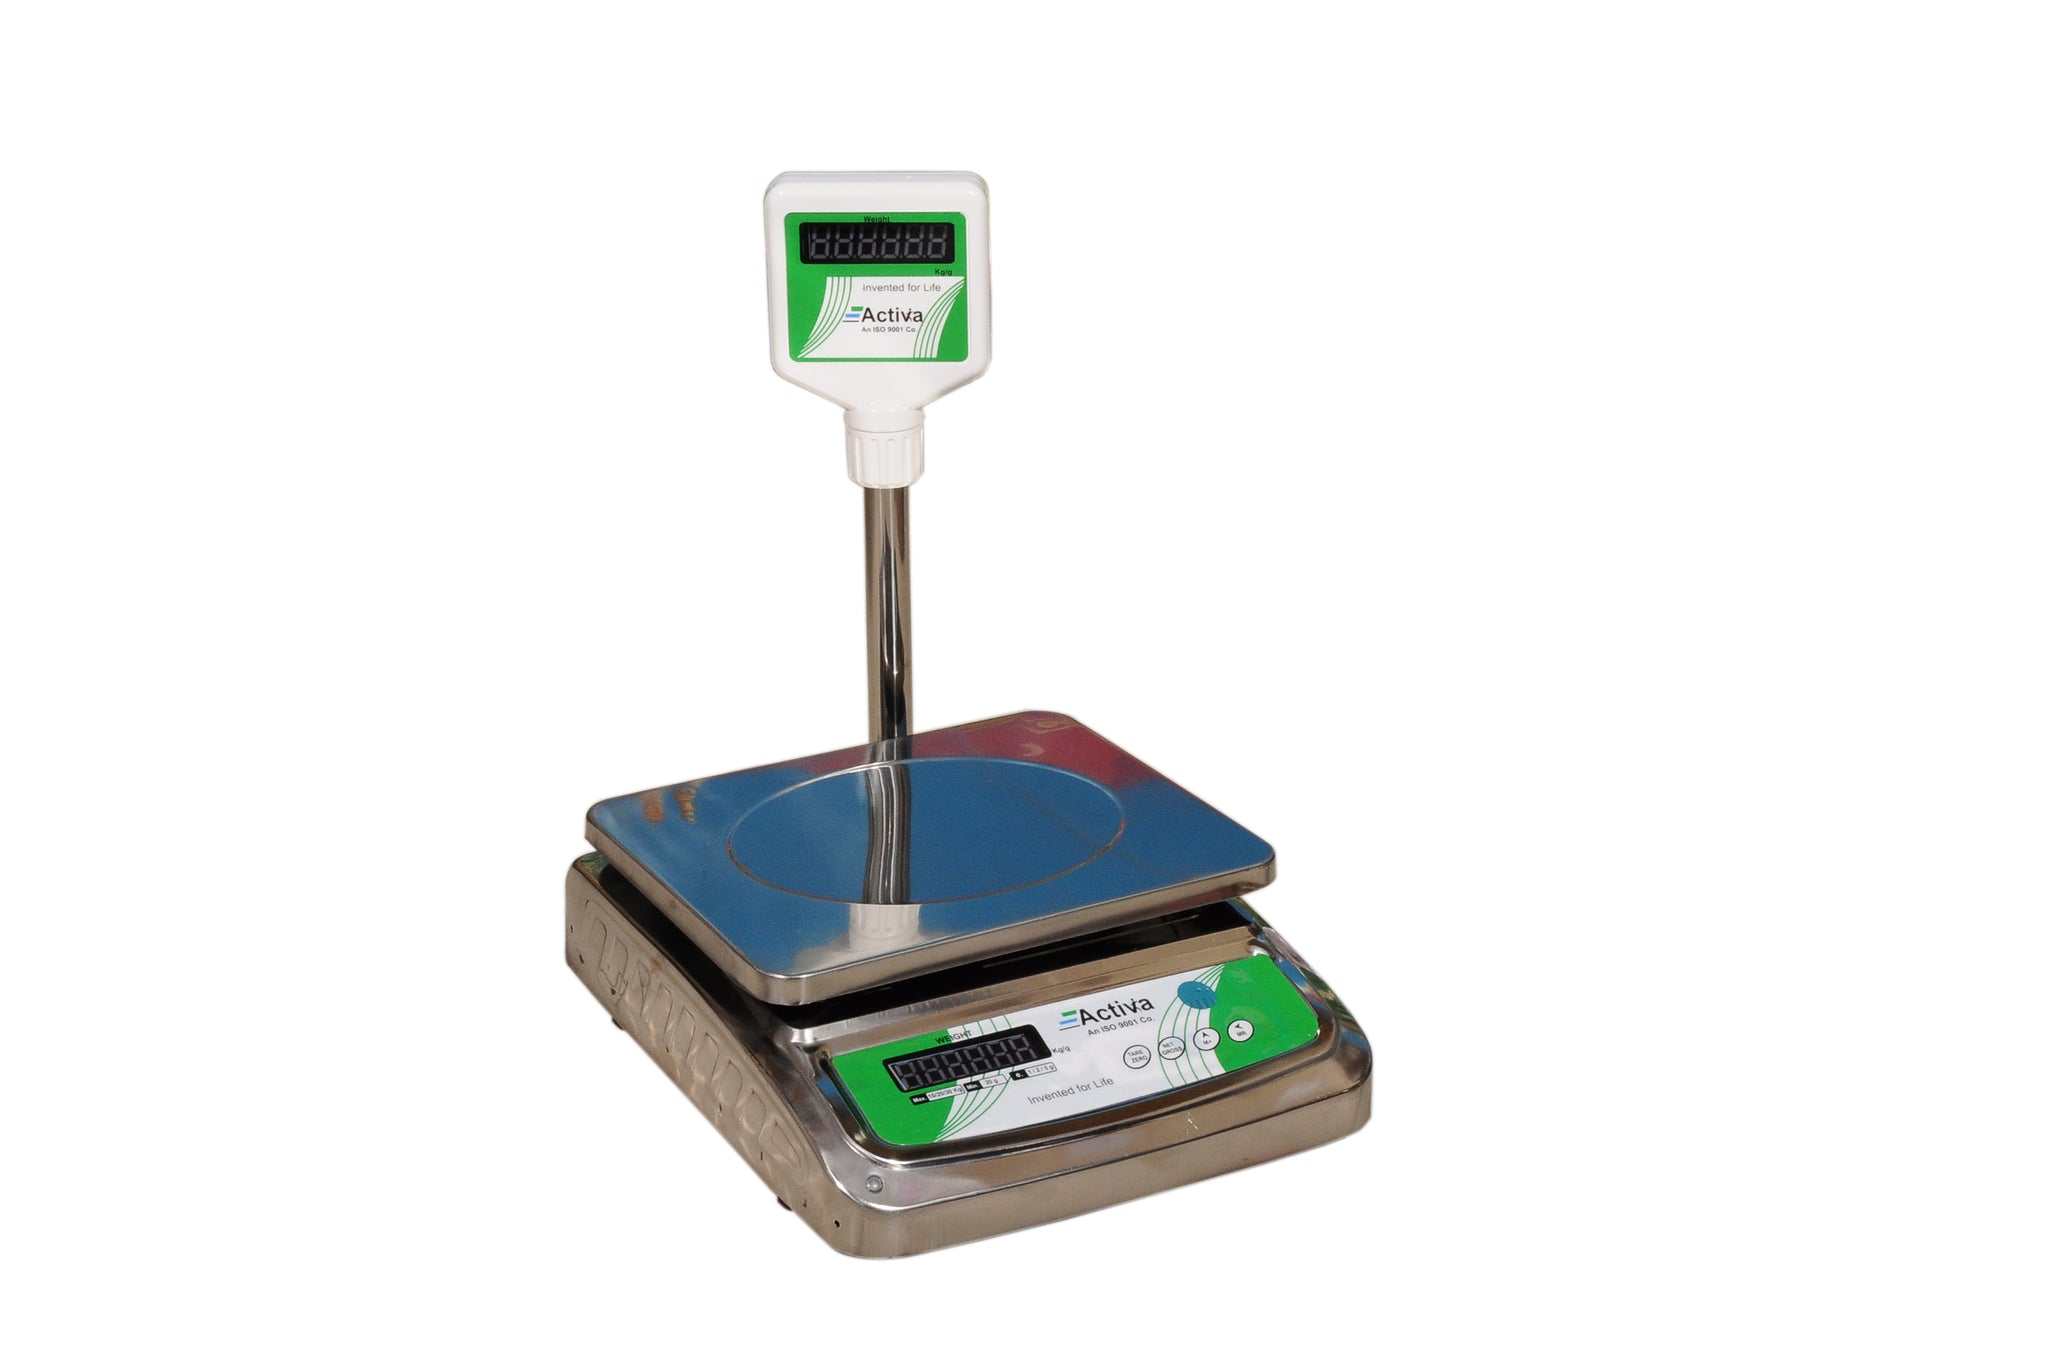 Buy Weighing Scale 20 Kg Online at Best Price